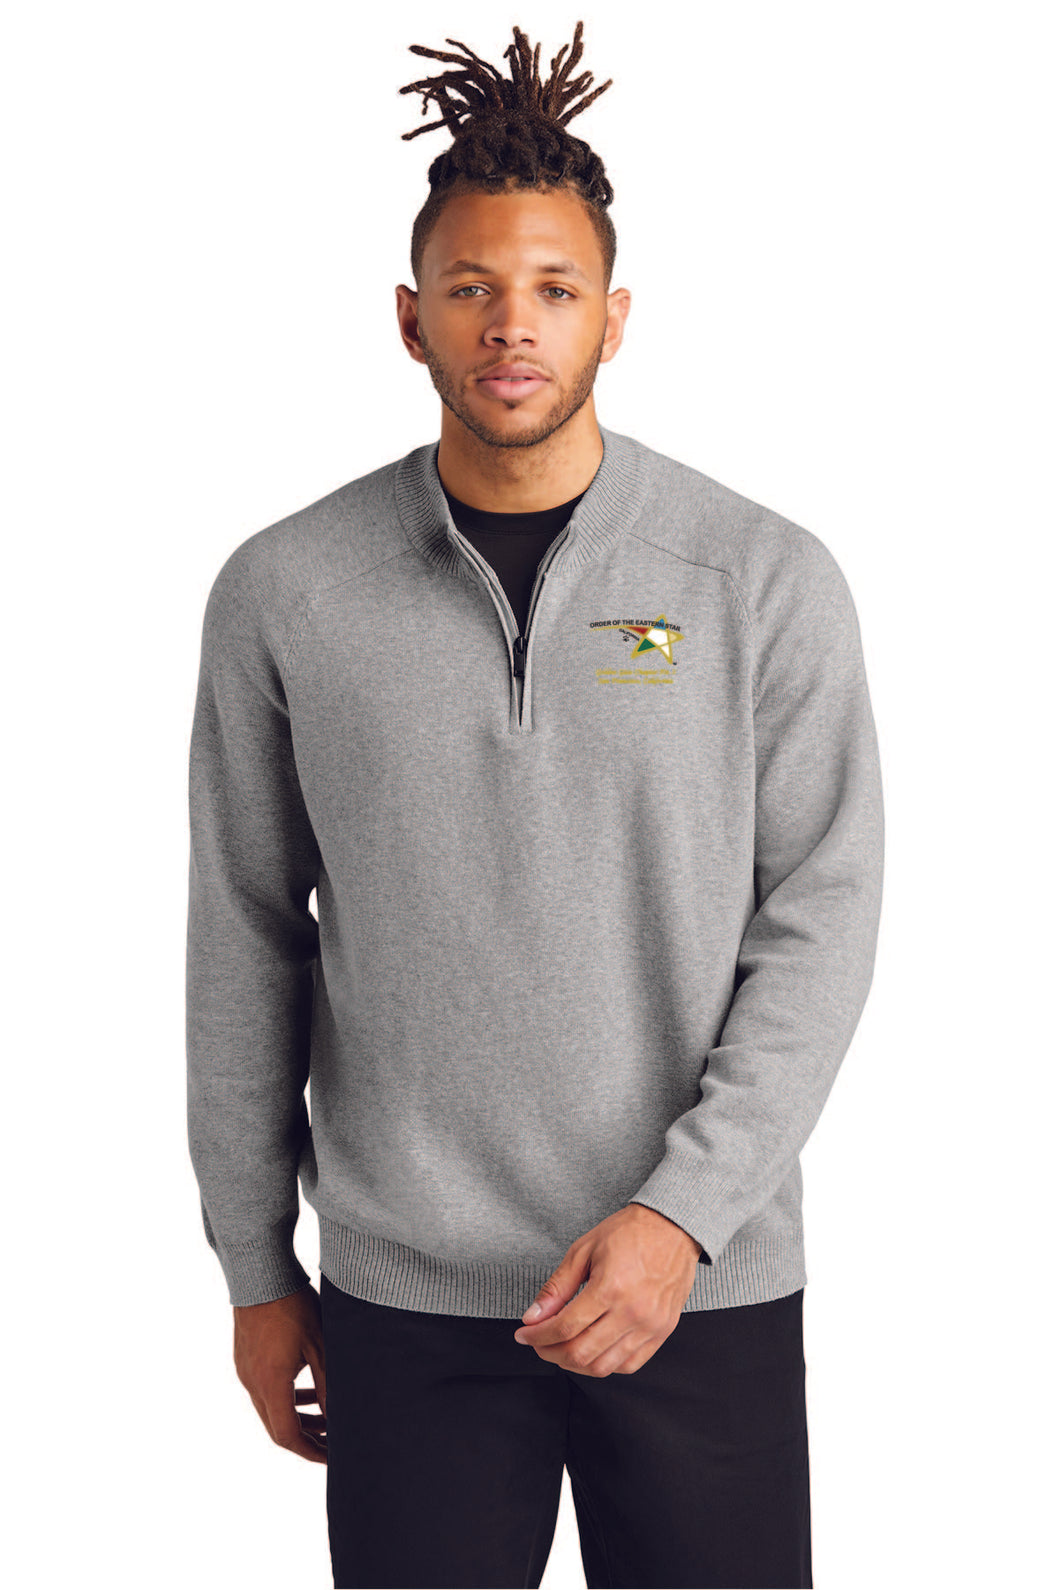 OES Golden Gate Chapter Mens 1/4 Zip